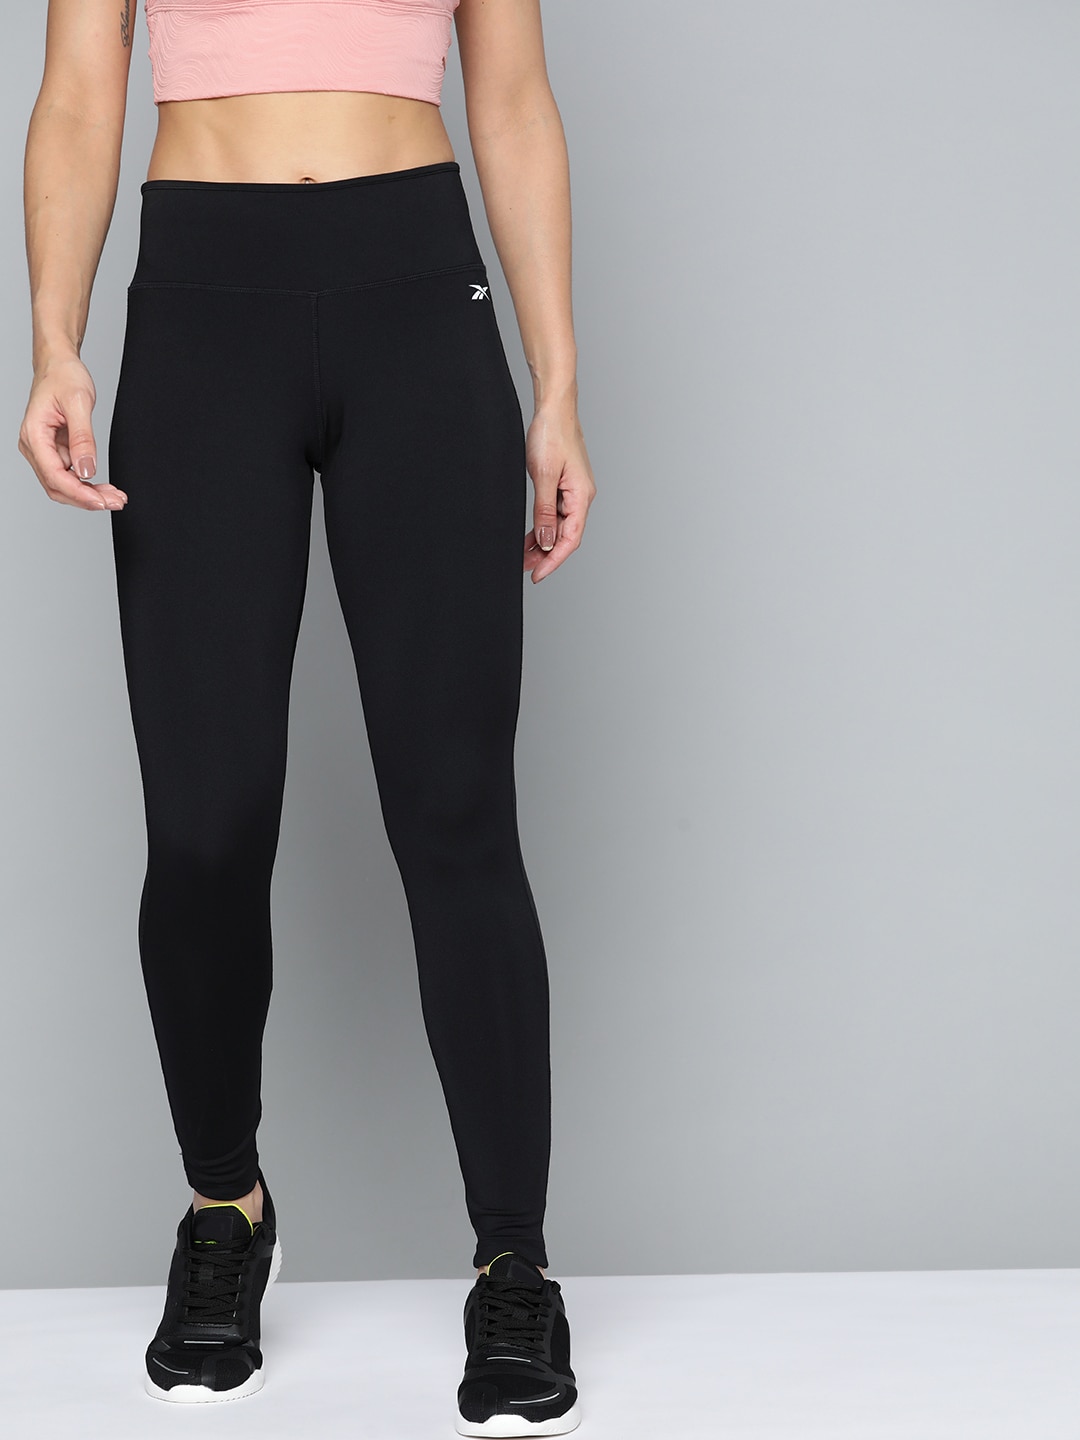 Reebok Women Black FND NEO Solid Fitted Training Tights Price in India